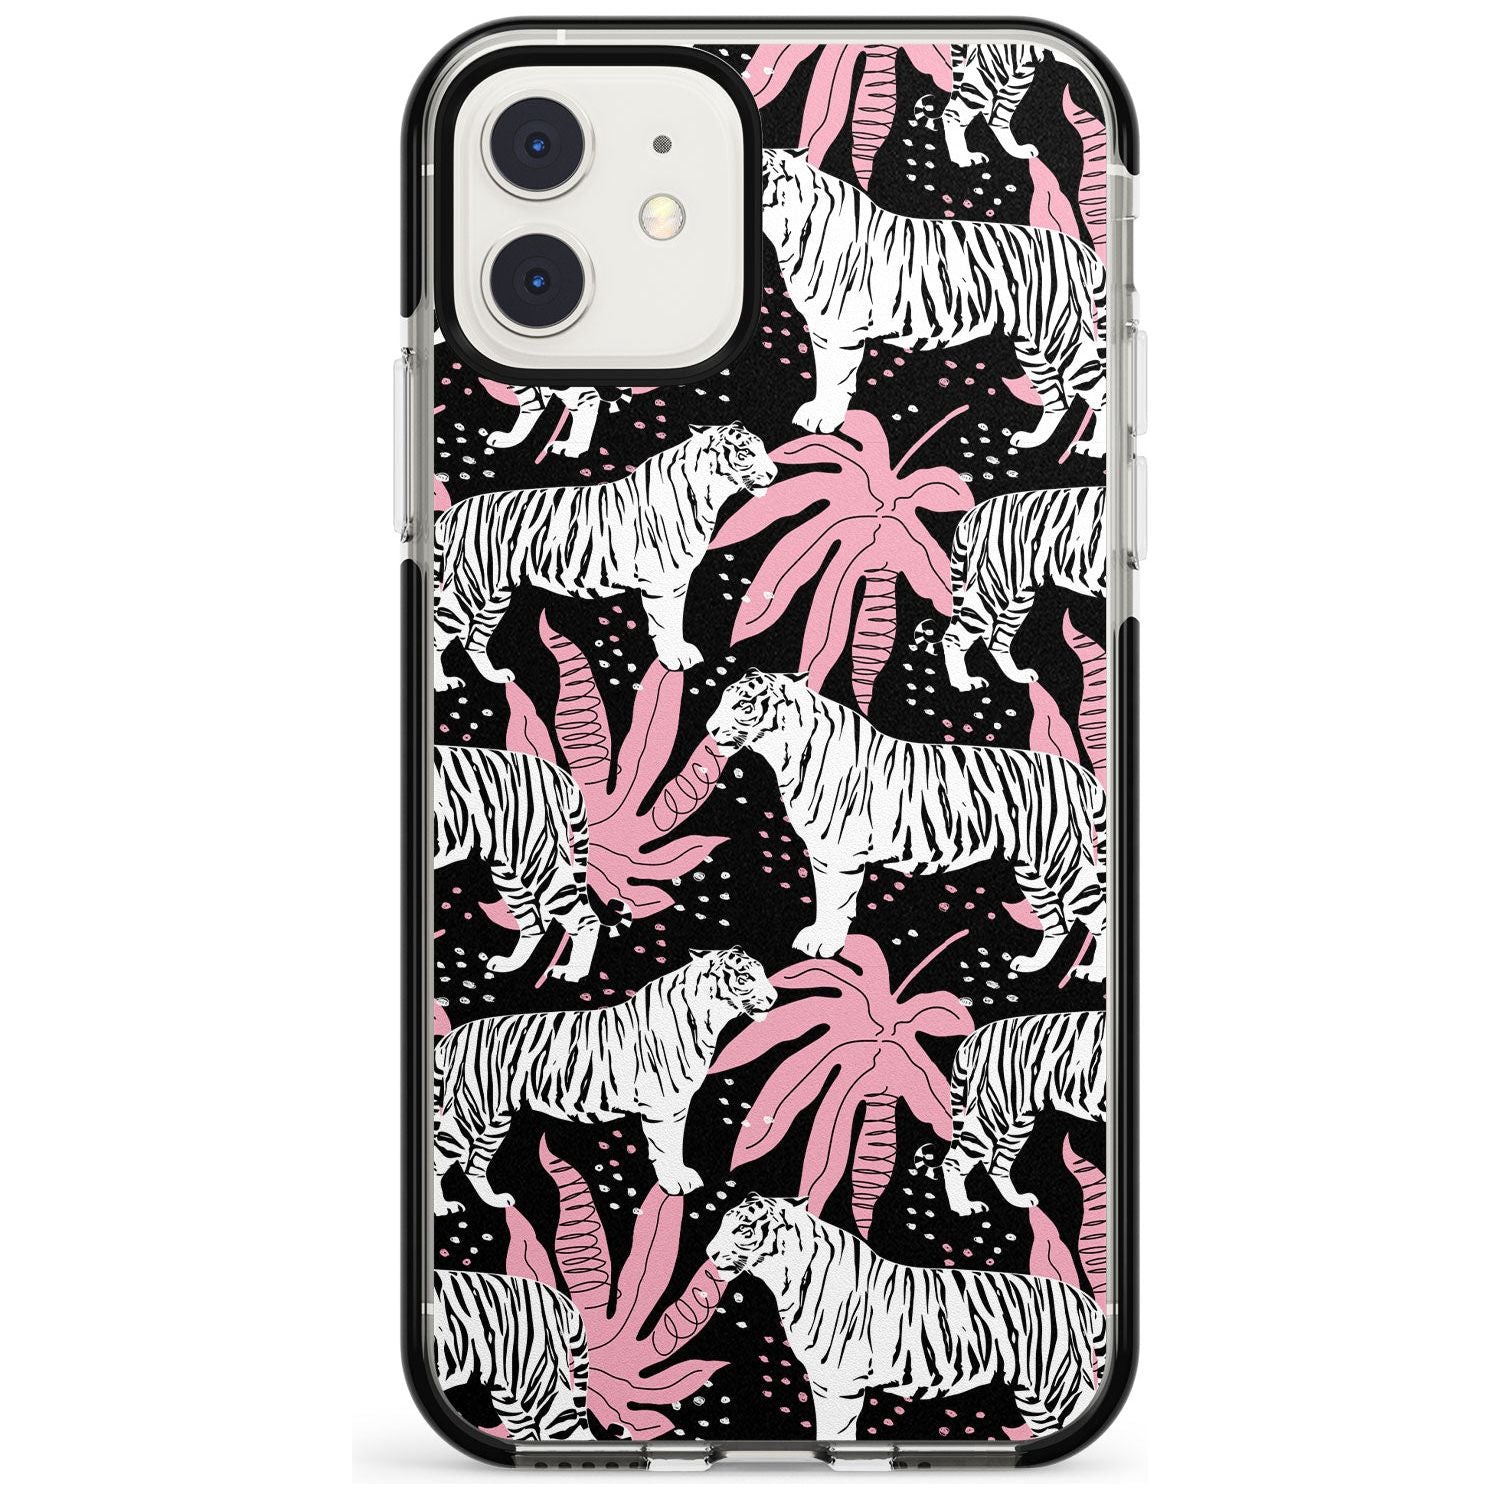 White Tigers on Black Pattern Black Impact Phone Case for iPhone 11